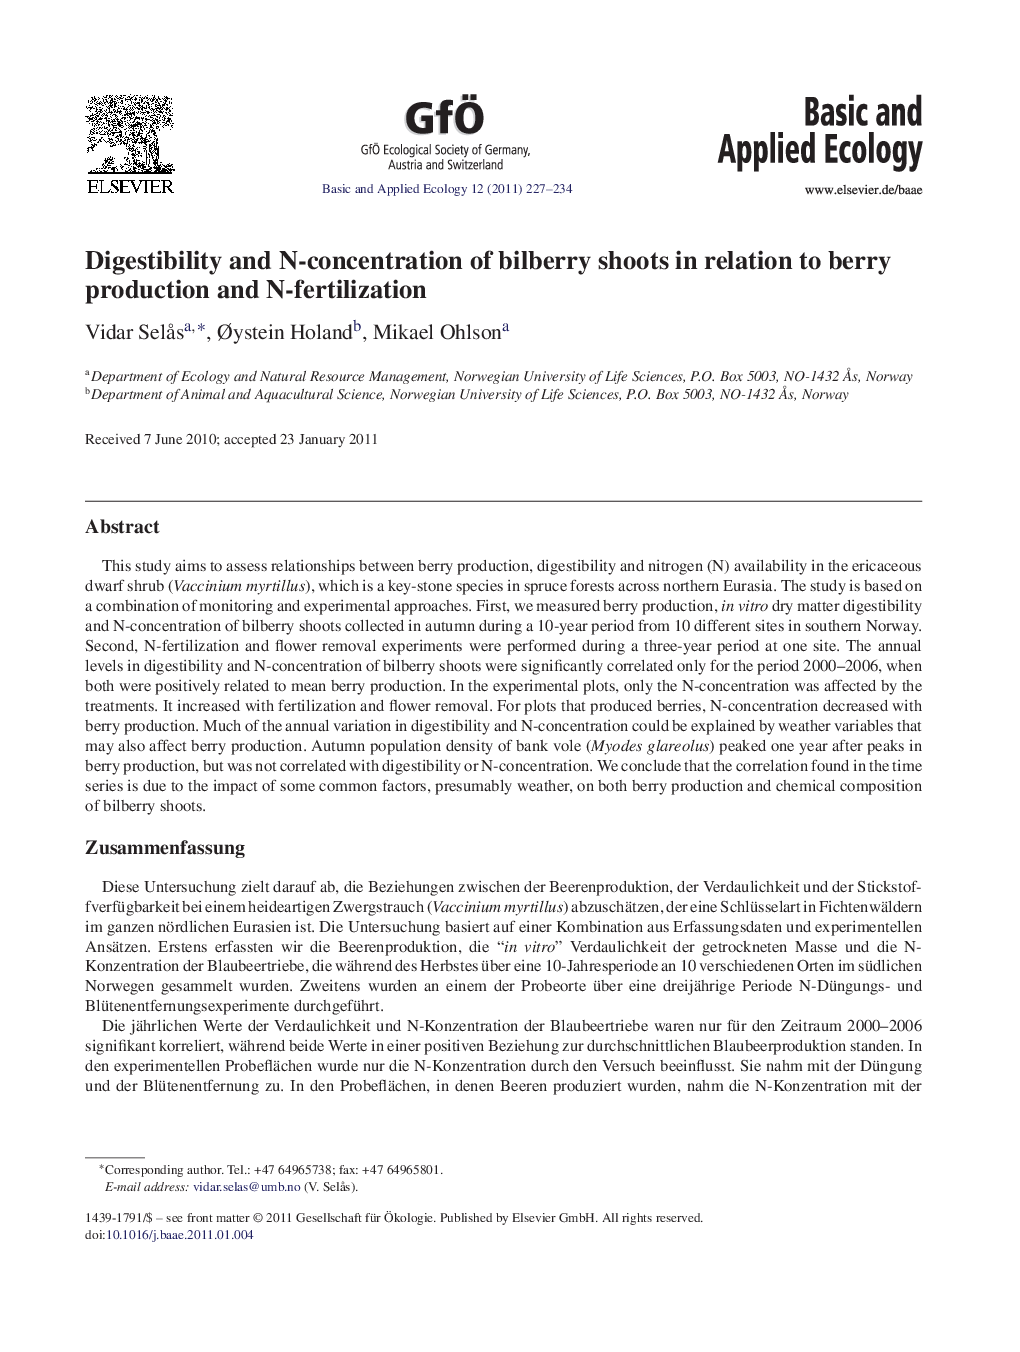 Digestibility and N-concentration of bilberry shoots in relation to berry production and N-fertilization